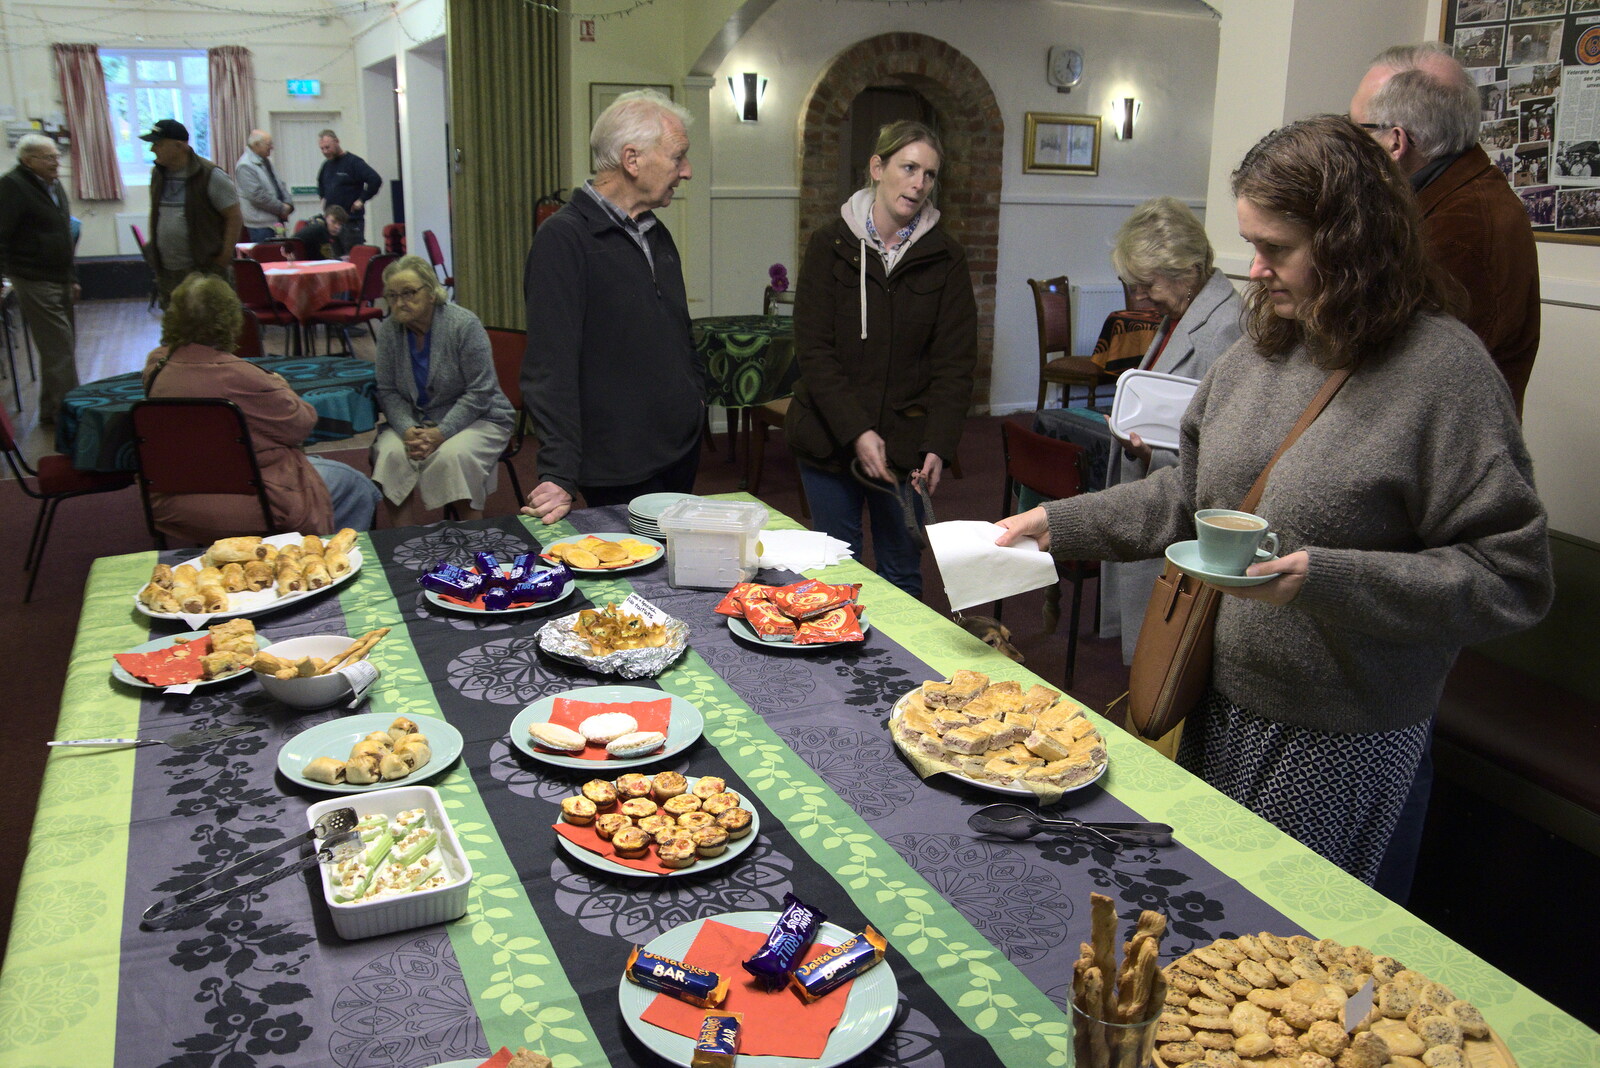 There's a good snack spread on the pool table from Brome Village Hall's 50th Anniversary, Brome, Suffolk - 12th November 2021